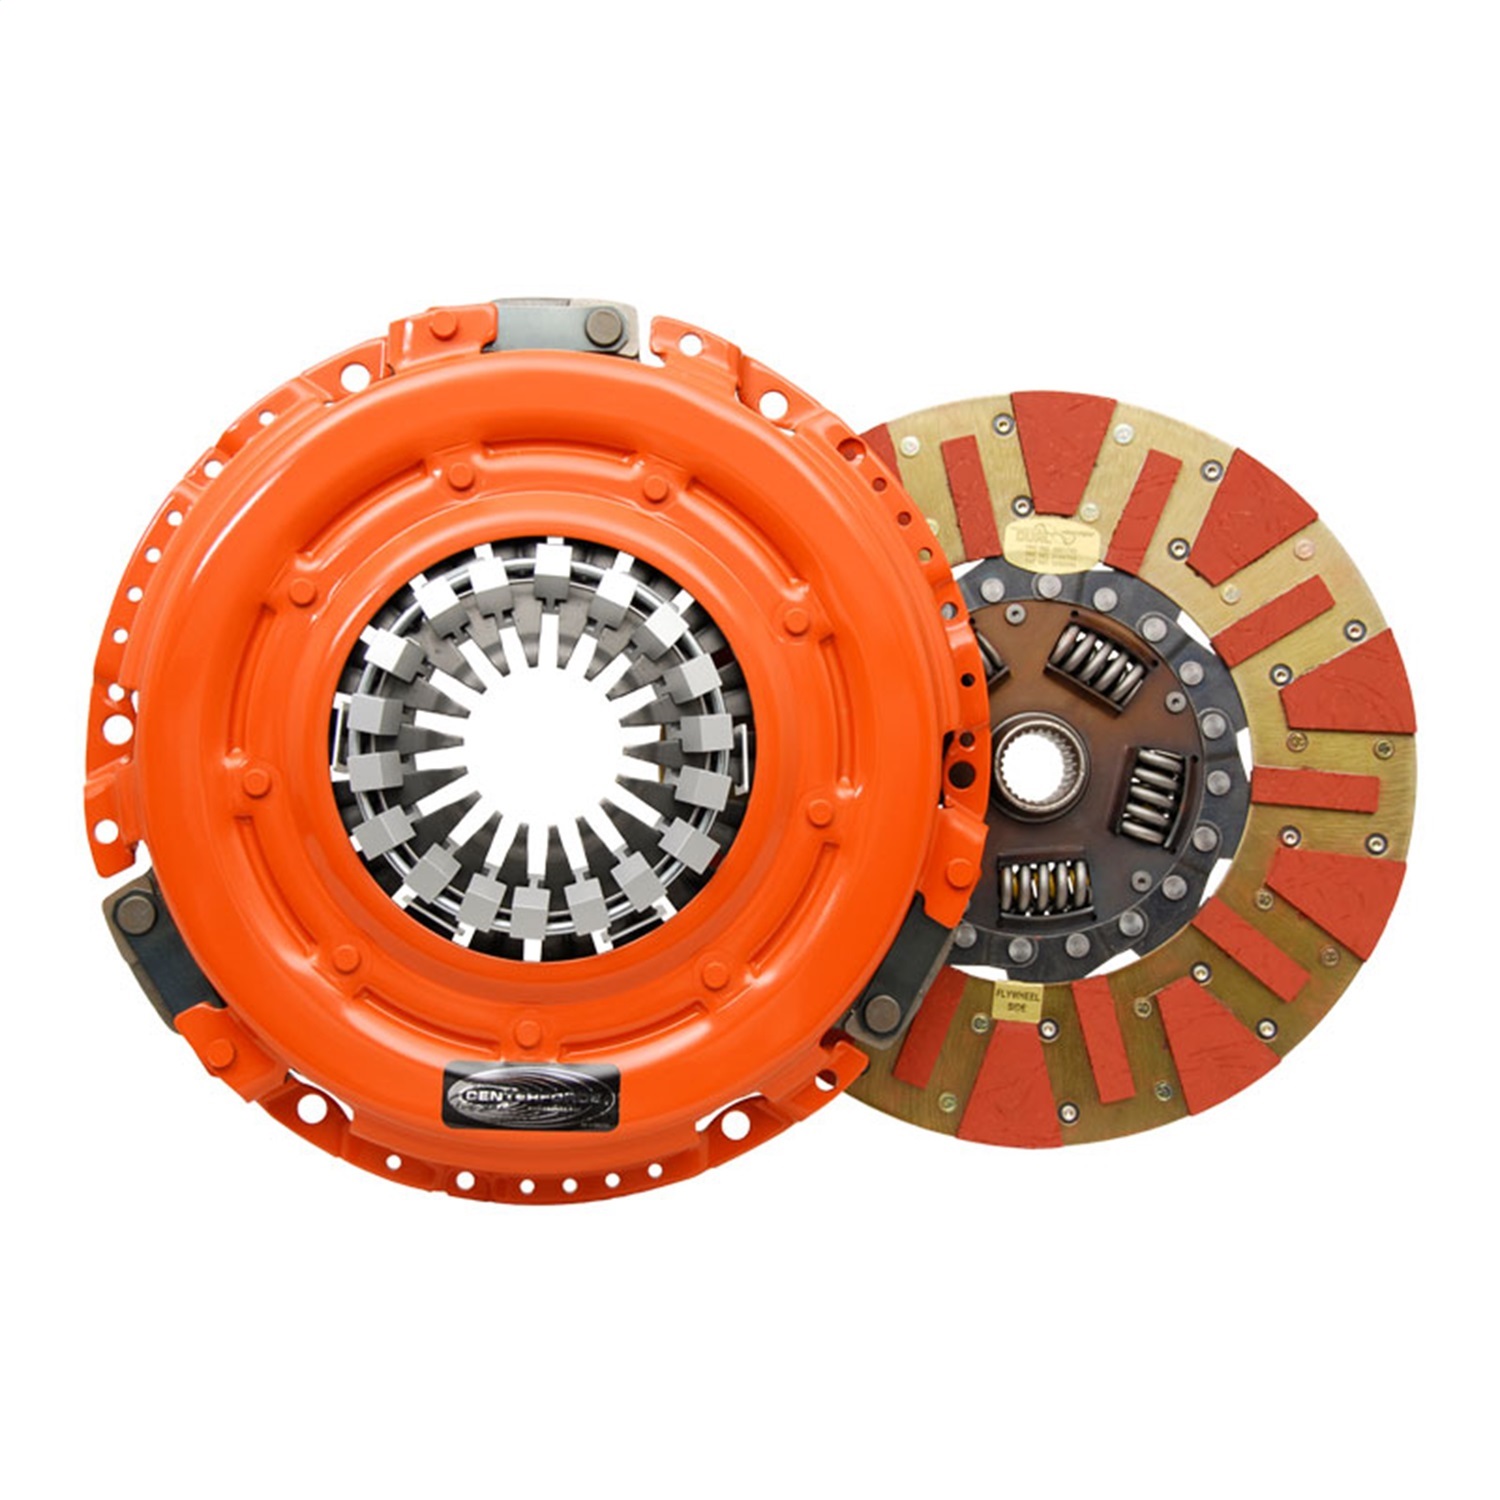 Centerforce Centerforce DF148033 Dual Friction Clutch Pressure Plate And Disc Set